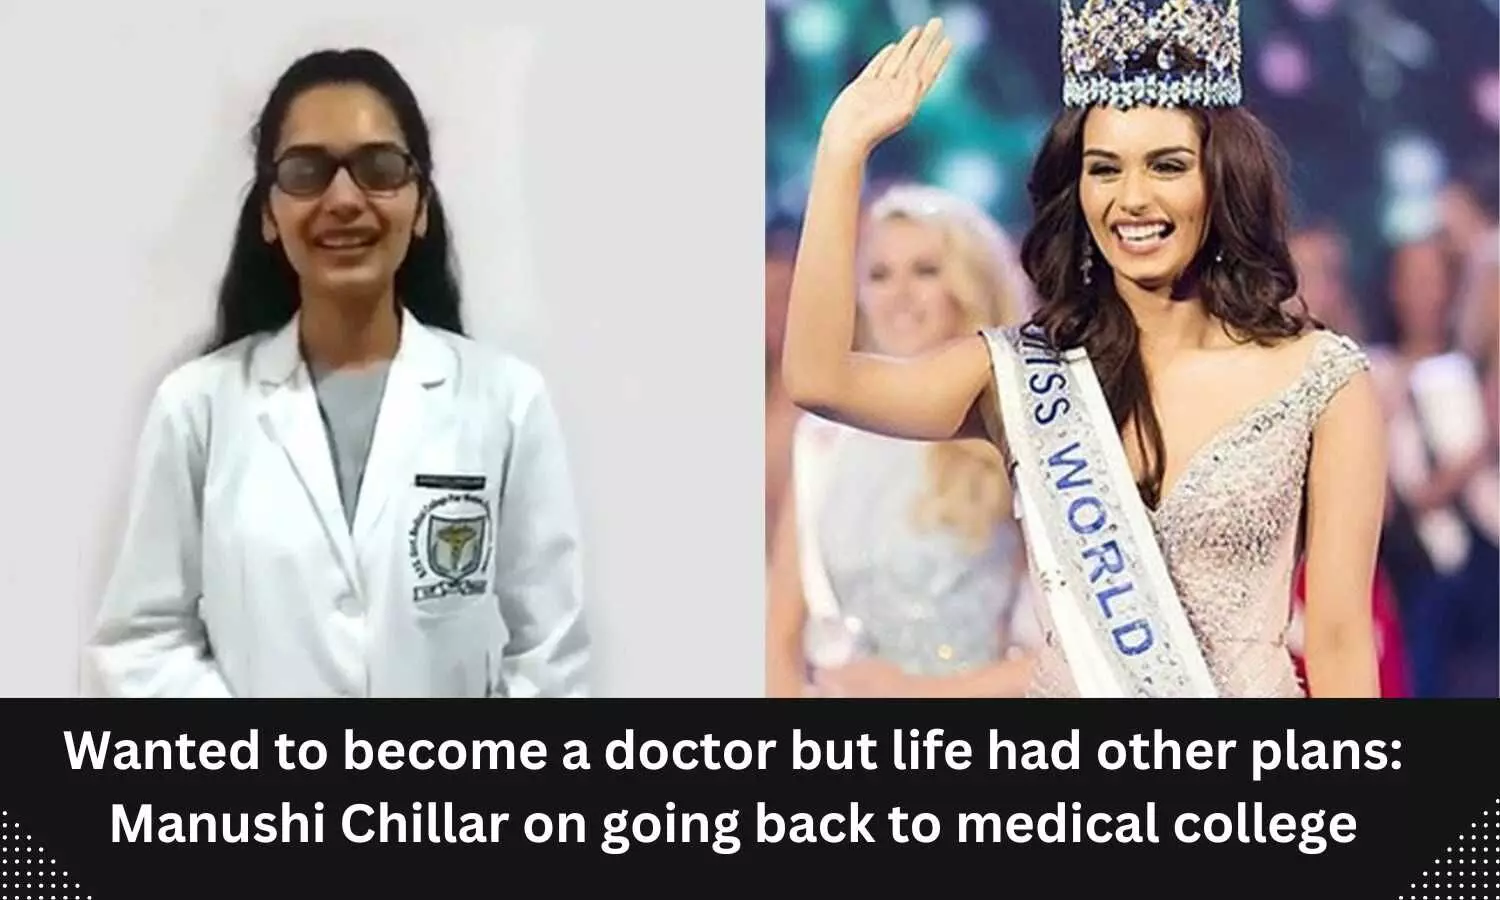 Wanted to become a doctor but life had other plans: Manushi Chillar on going back to medical college